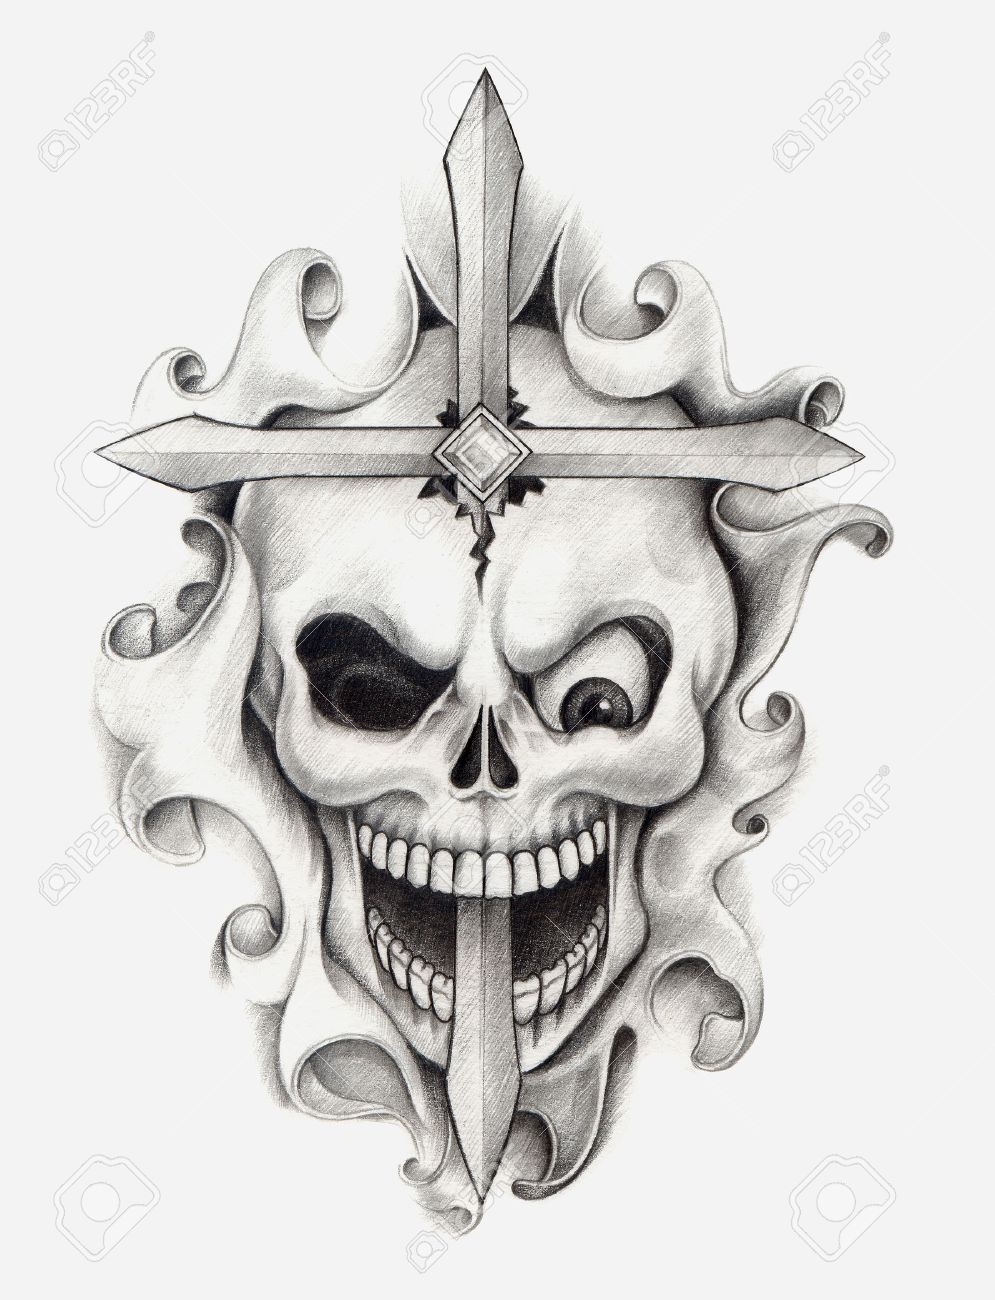 Skull Cross Tattoo Hand Drawing On Paper Stock Photo Picture And throughout measurements 995 X 1300